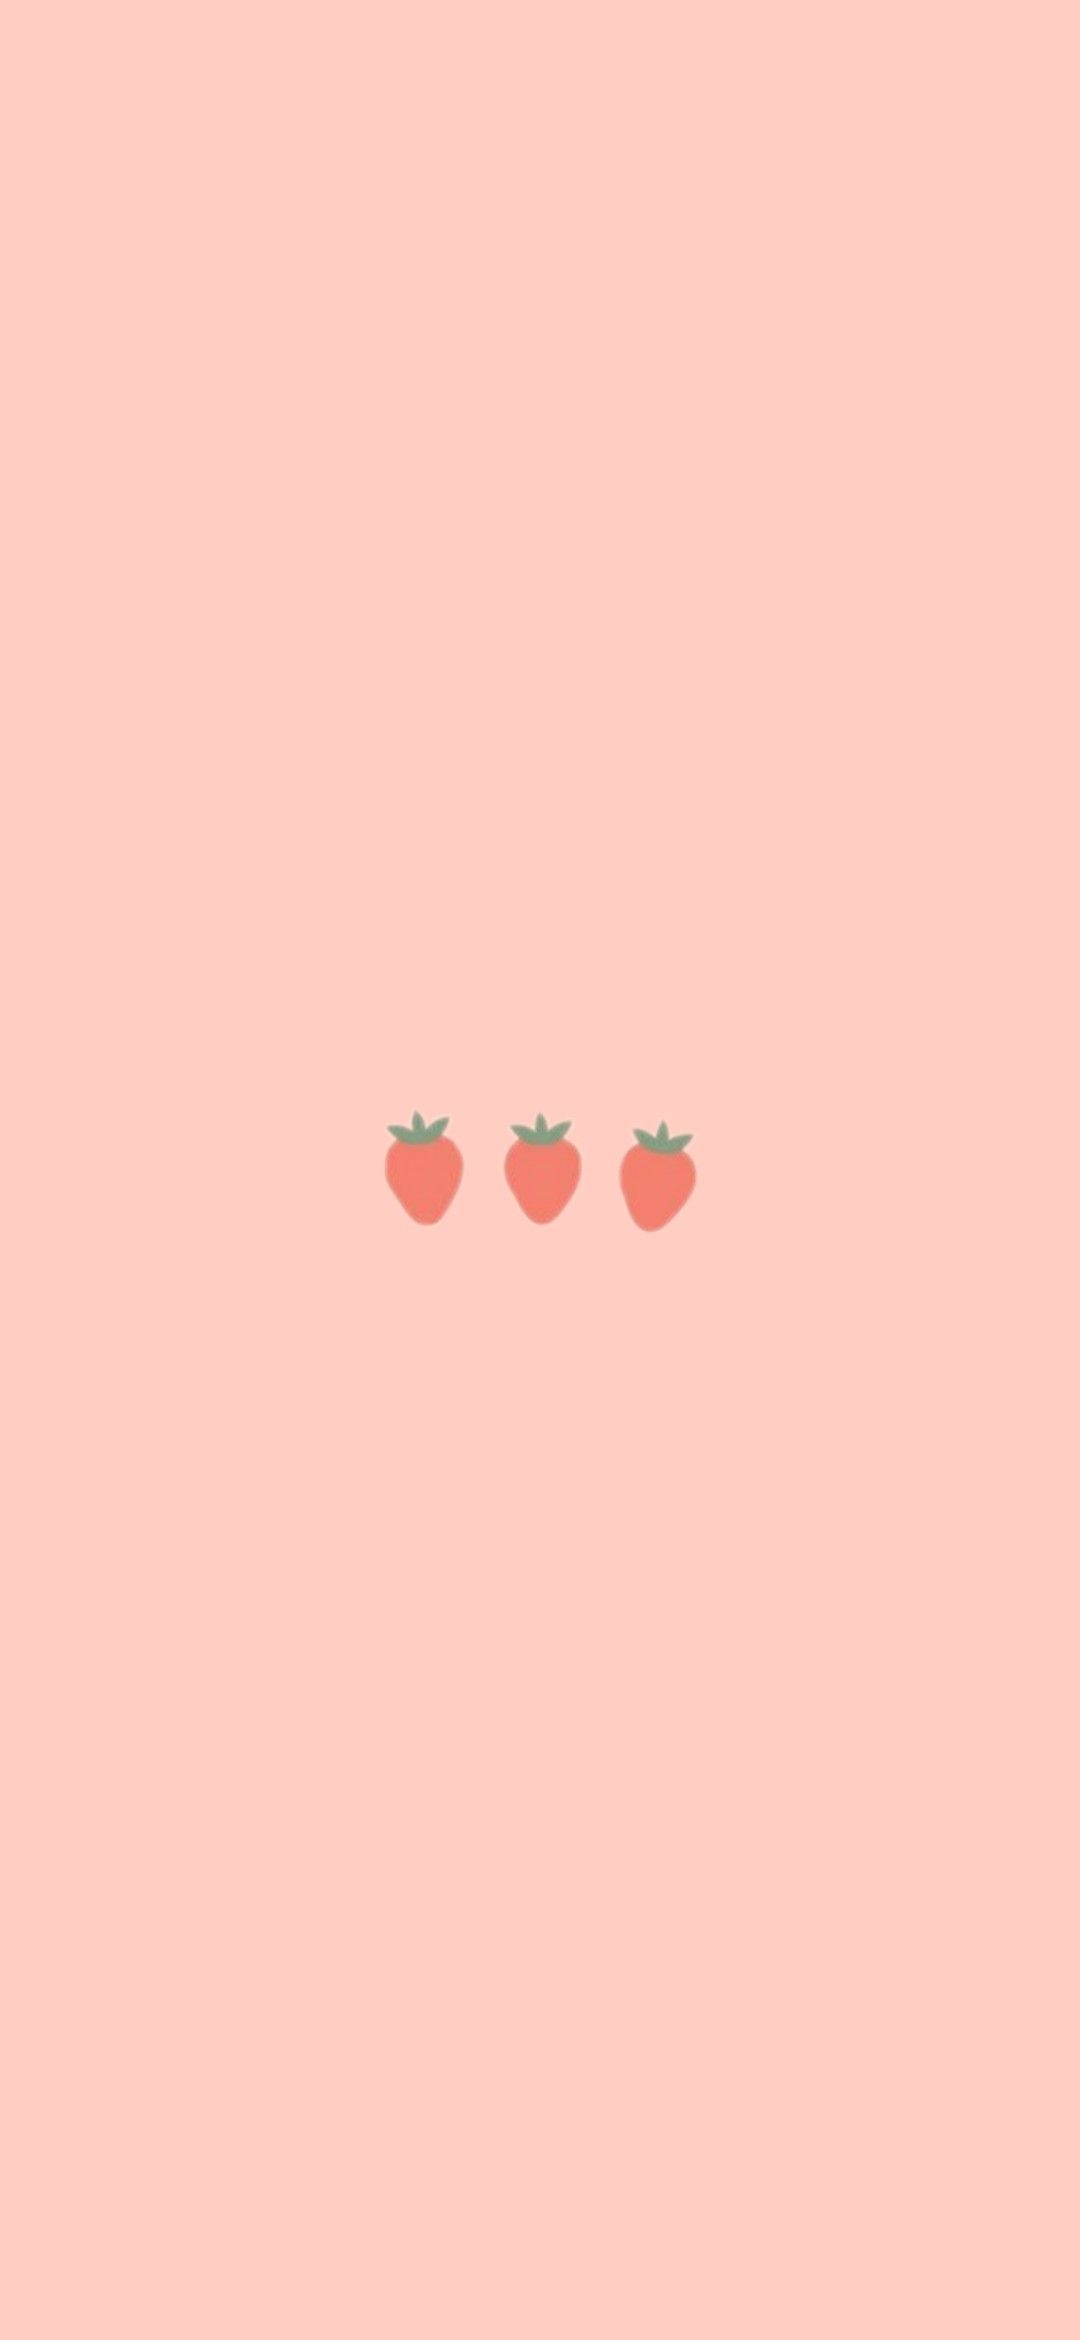 Budget recipes #strawberry #aesthetic strawberry aesthetic pink, strawberry shortcake mela. Baby pink wallpaper iphone, Cute patterns wallpaper, Peach wallpaper